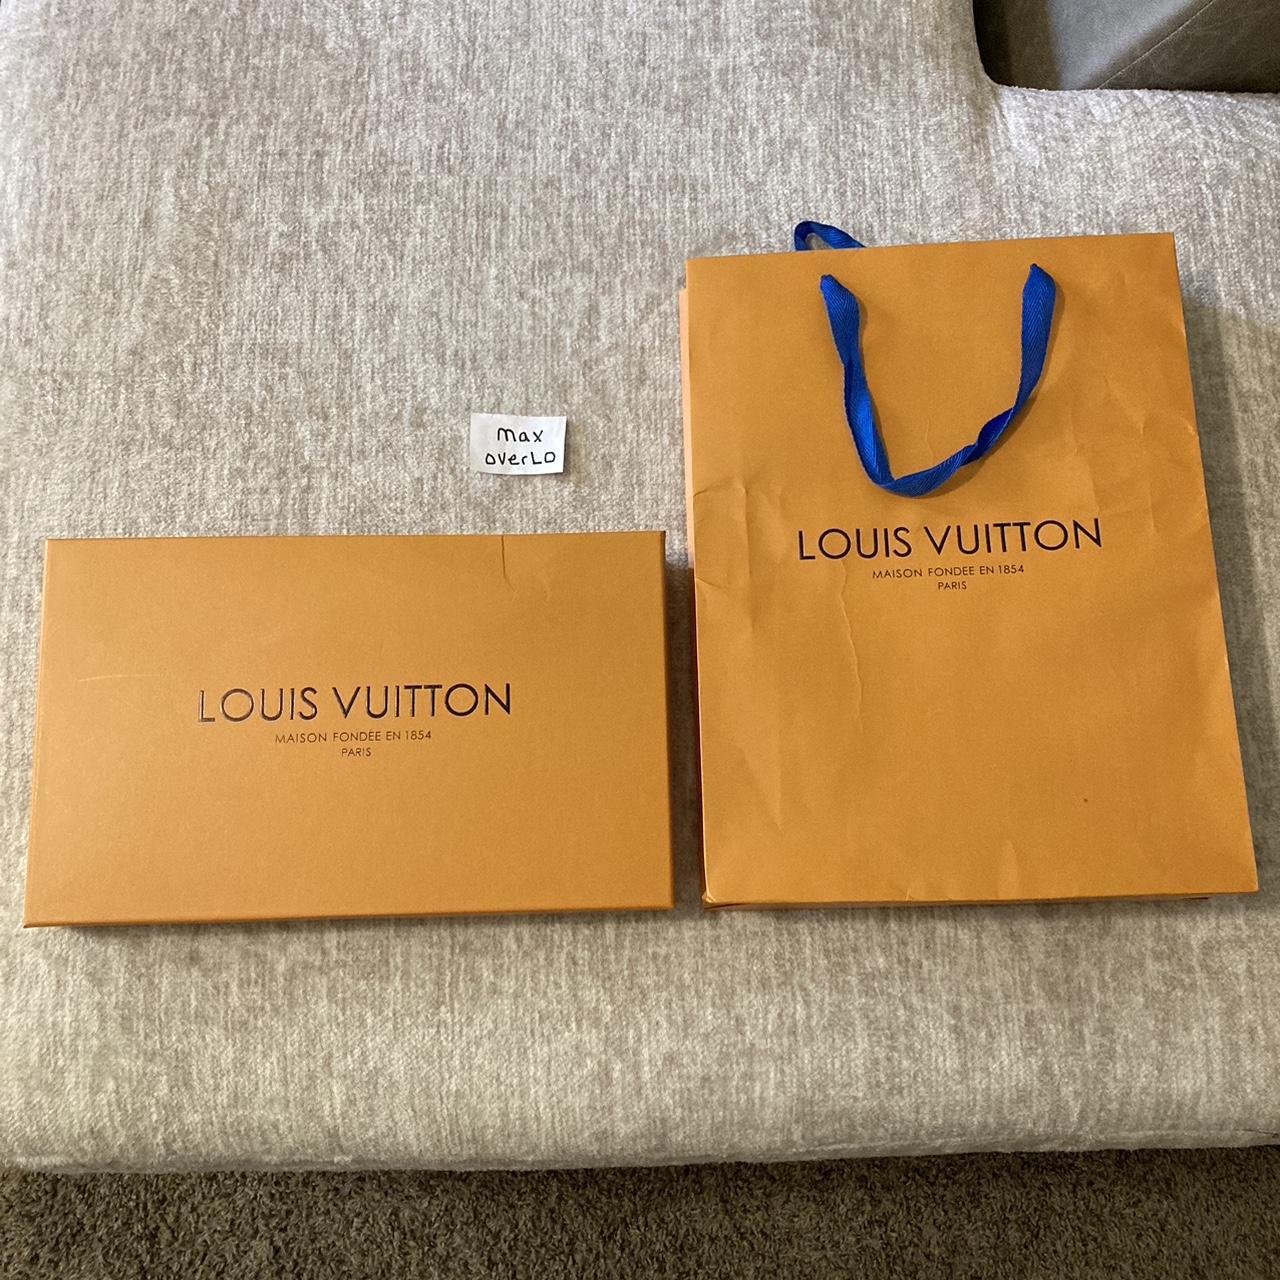 Louis Vuitton Half and Half Galaxy T-Shirt available - Depop